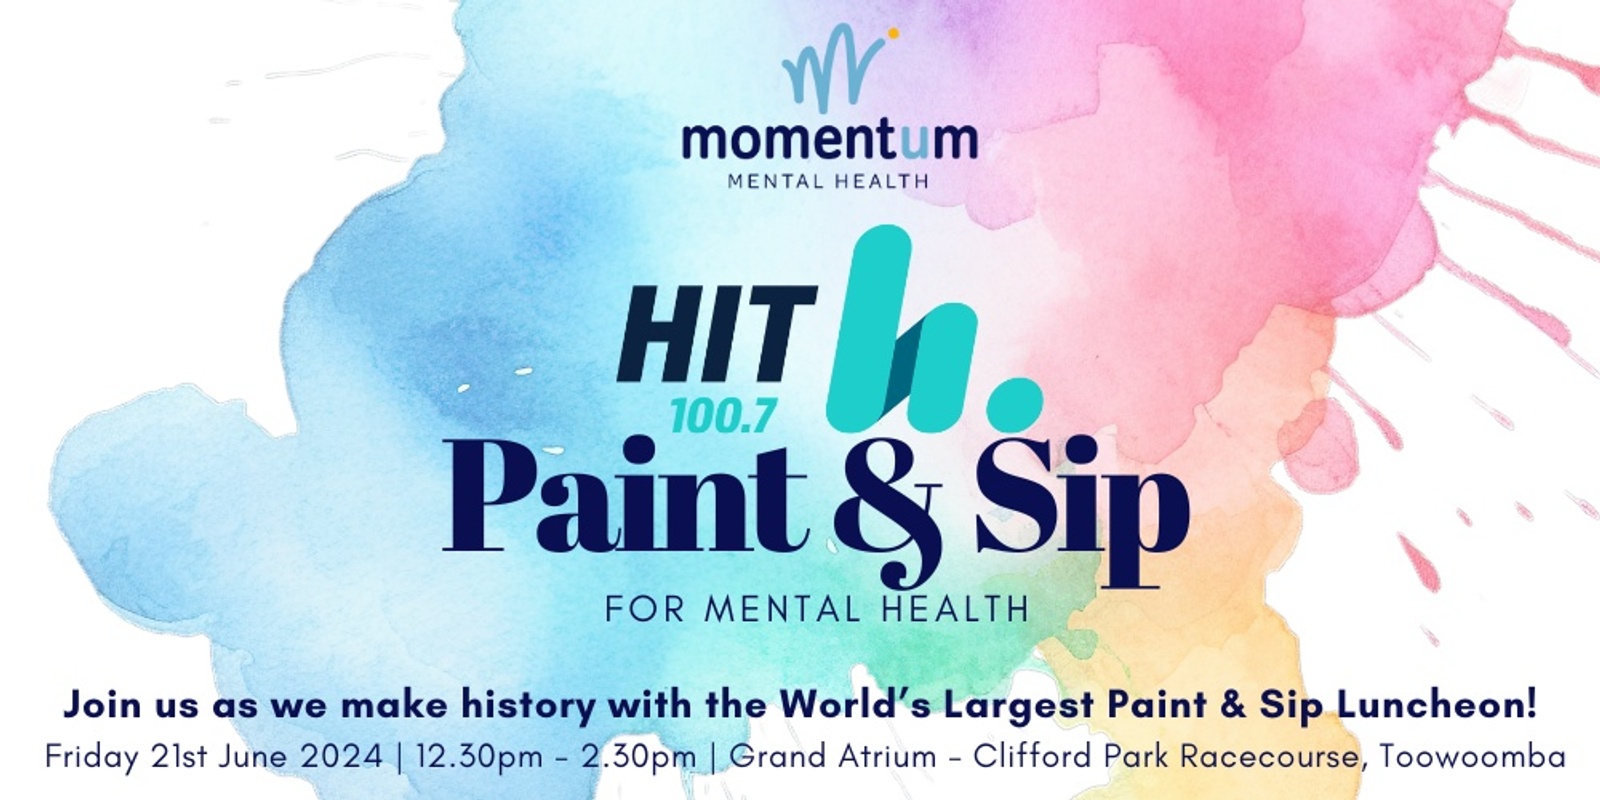 Banner image for The World's Largest Paint & Sip Luncheon